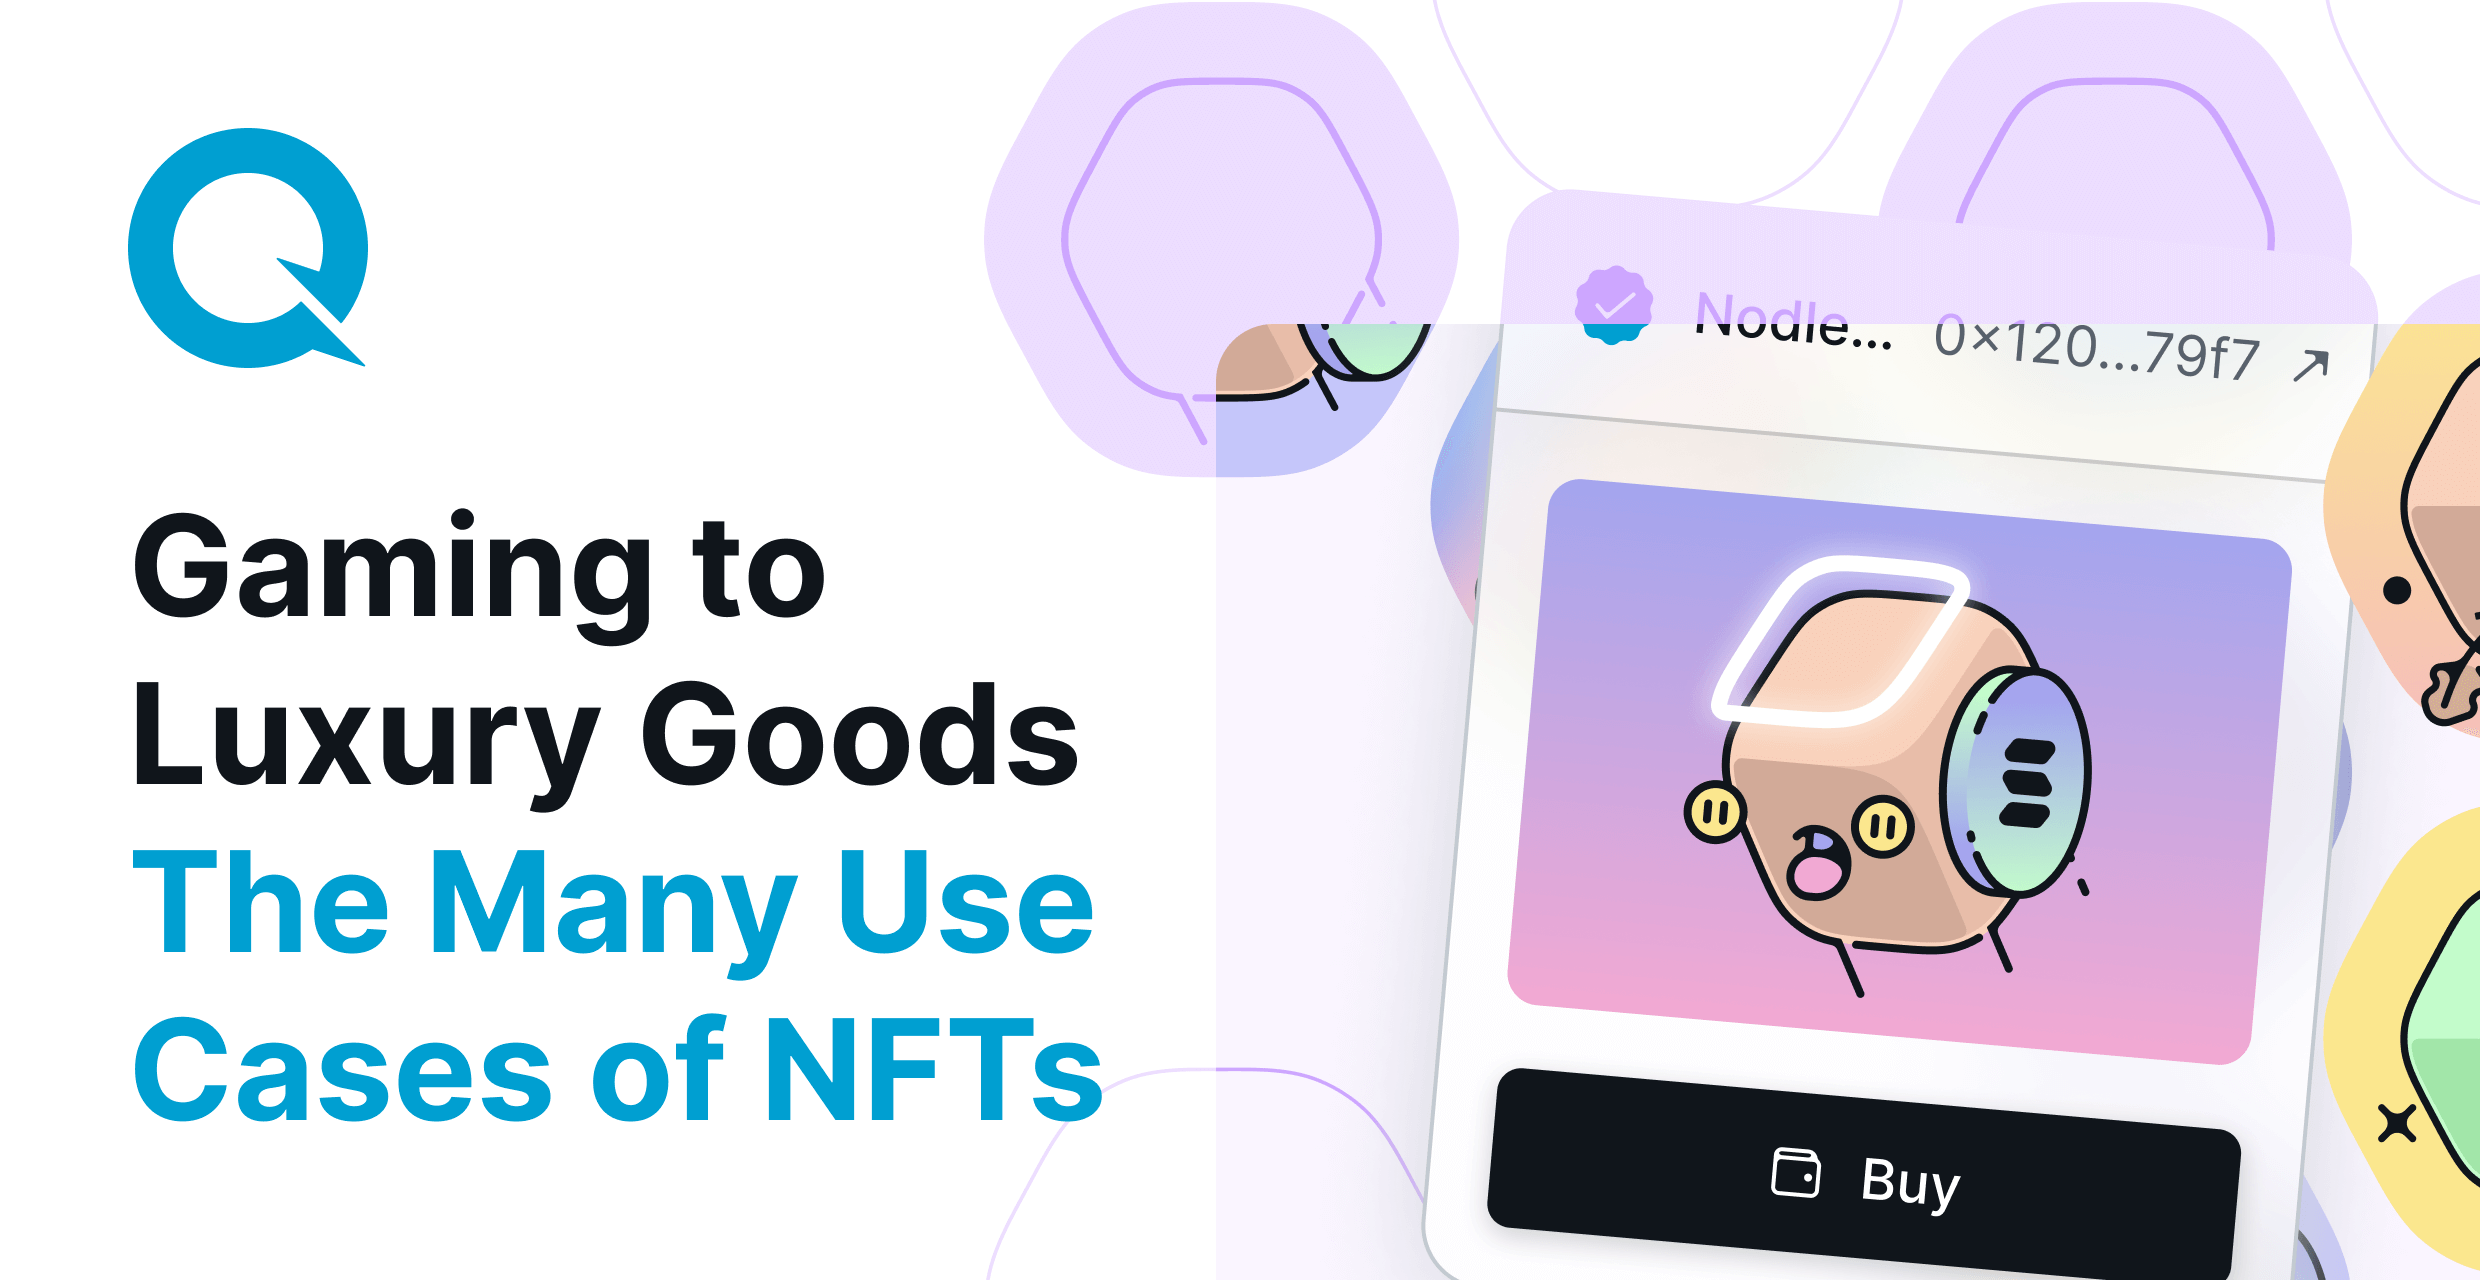 gaming-to-luxury-goods-many-use-cases-of-nfts